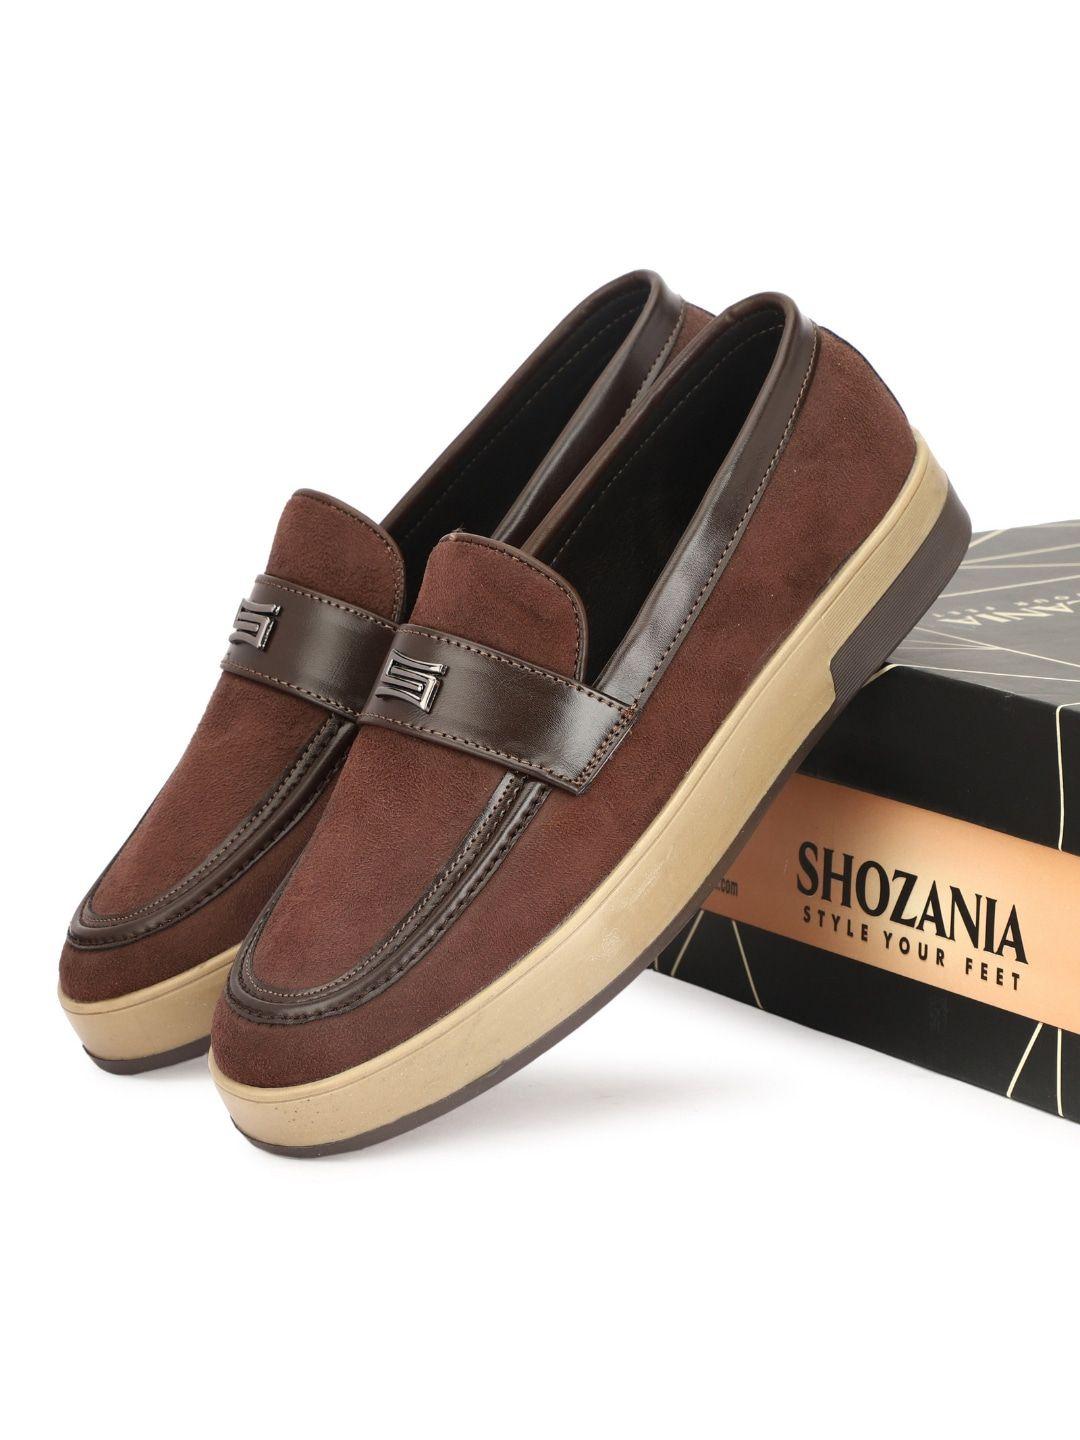 shozania men embellished suede comfort insole loafers